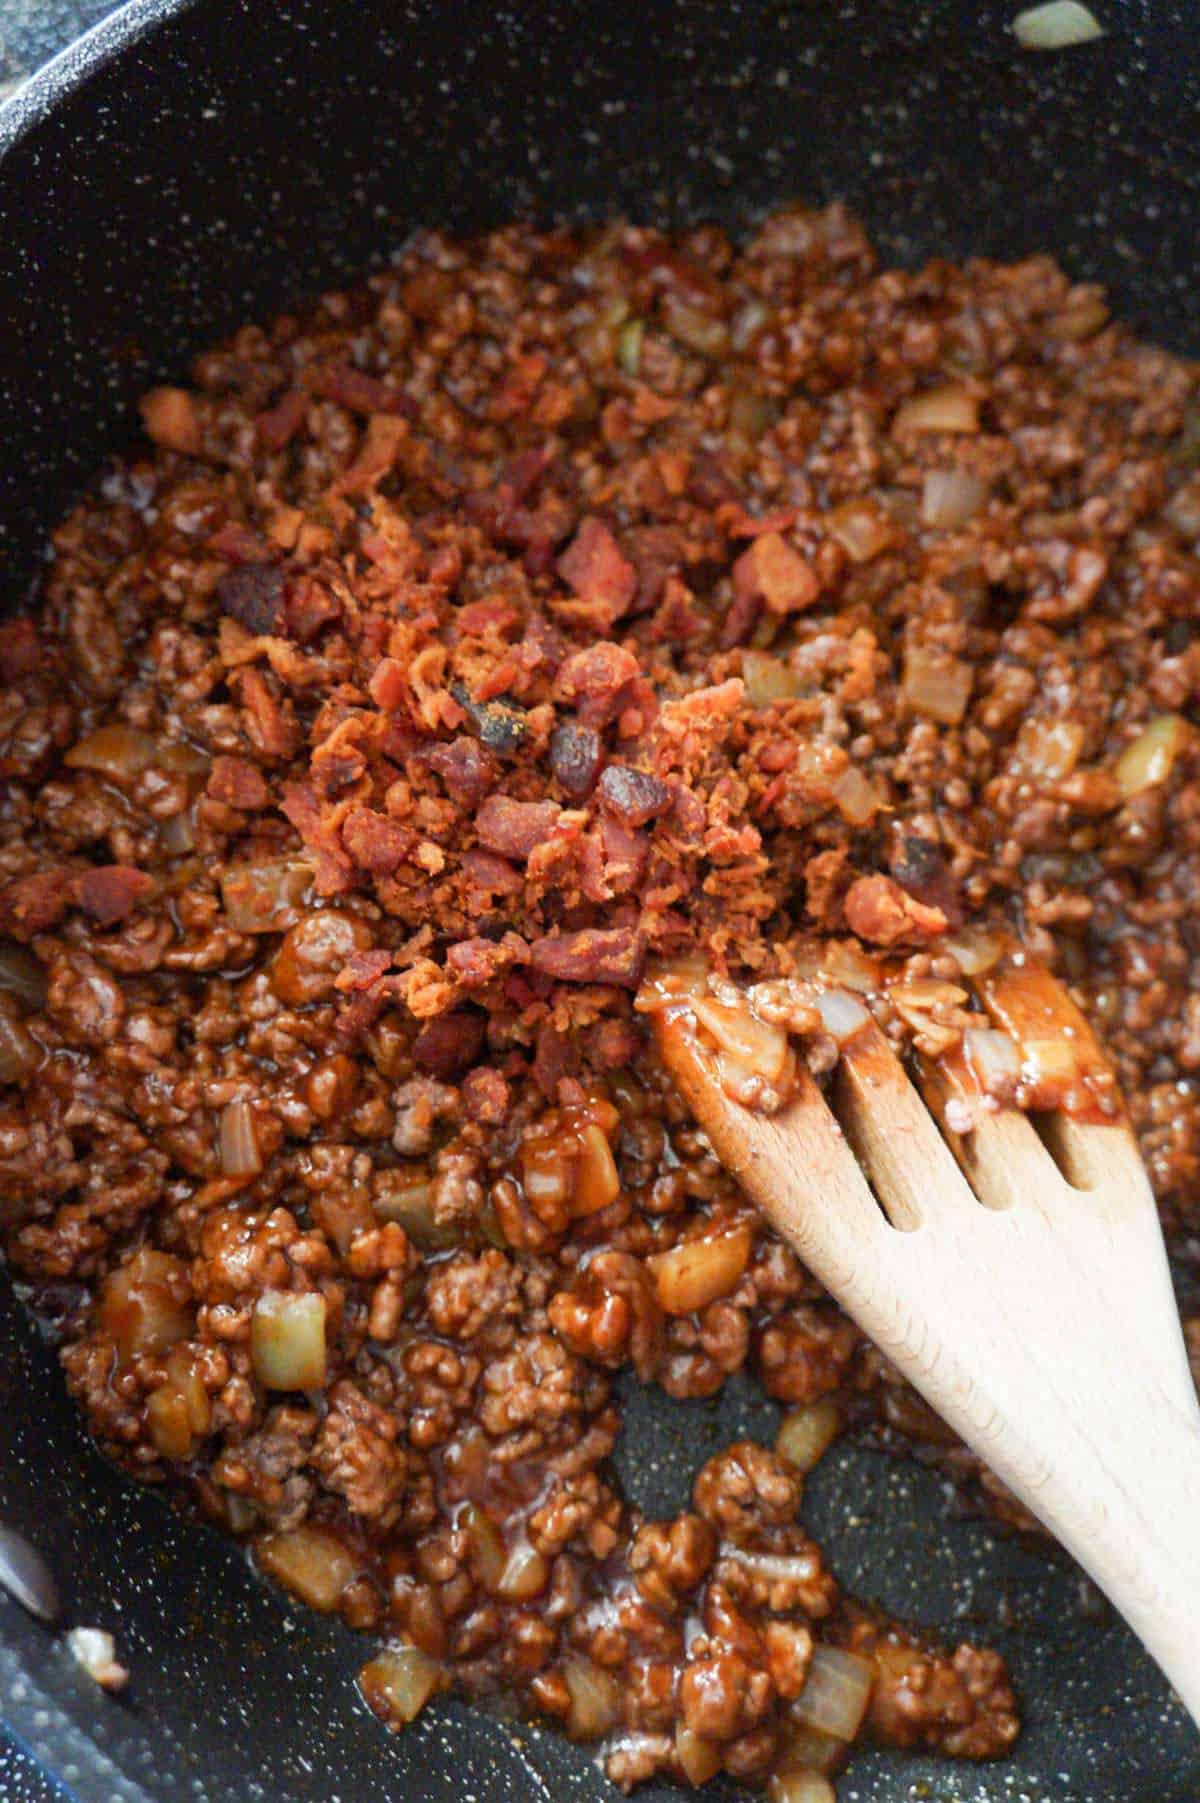 crumbled bacon on top of ground beef tossed in bbq sauce in a saute pan